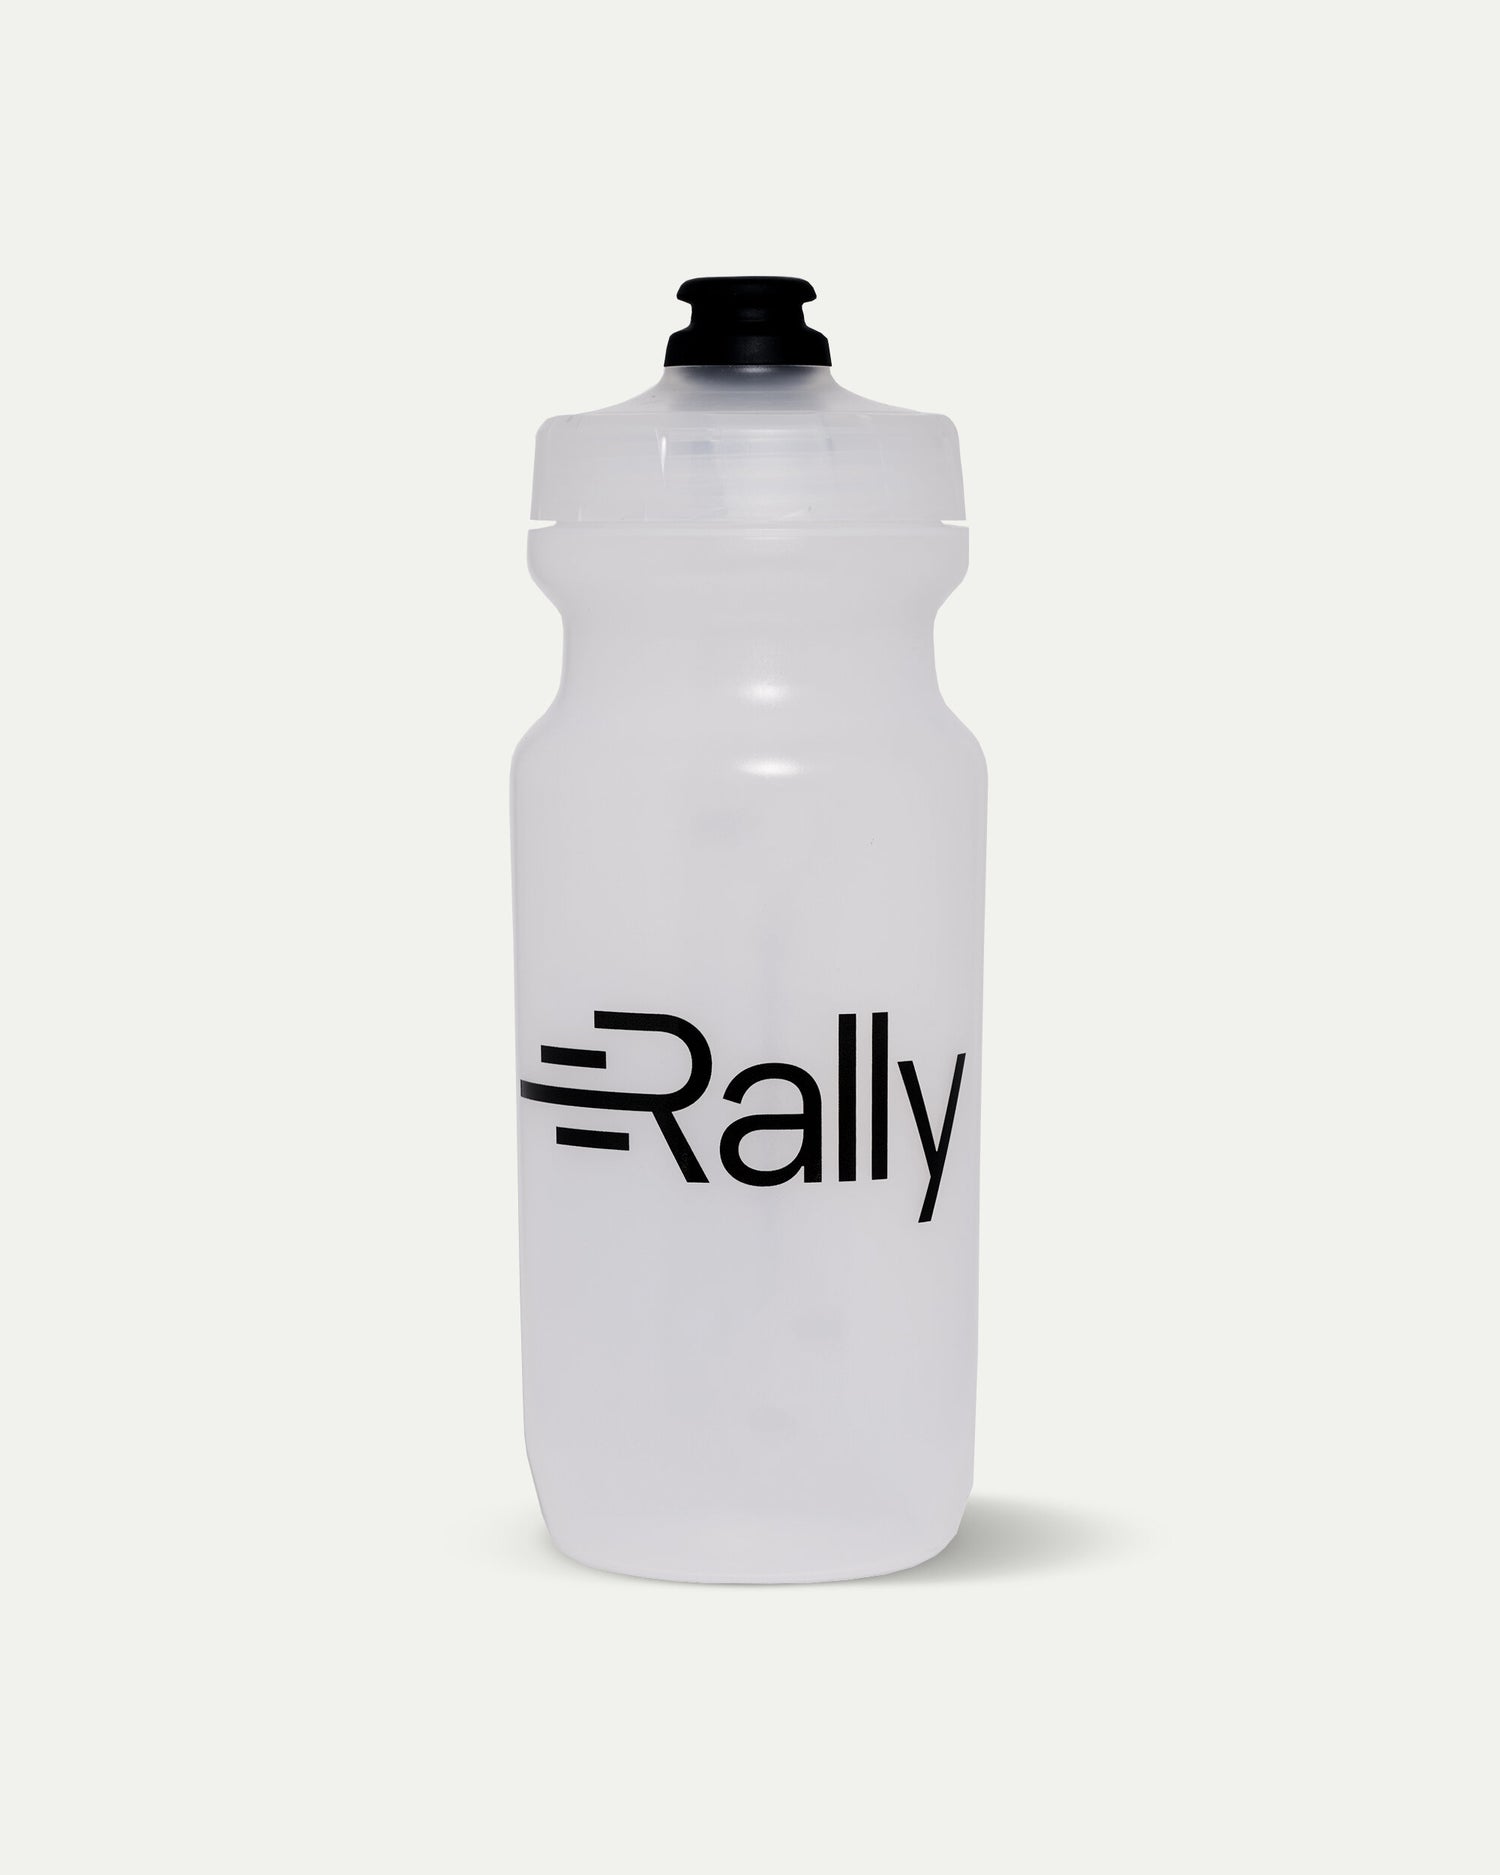 Rally Beer water bottle front